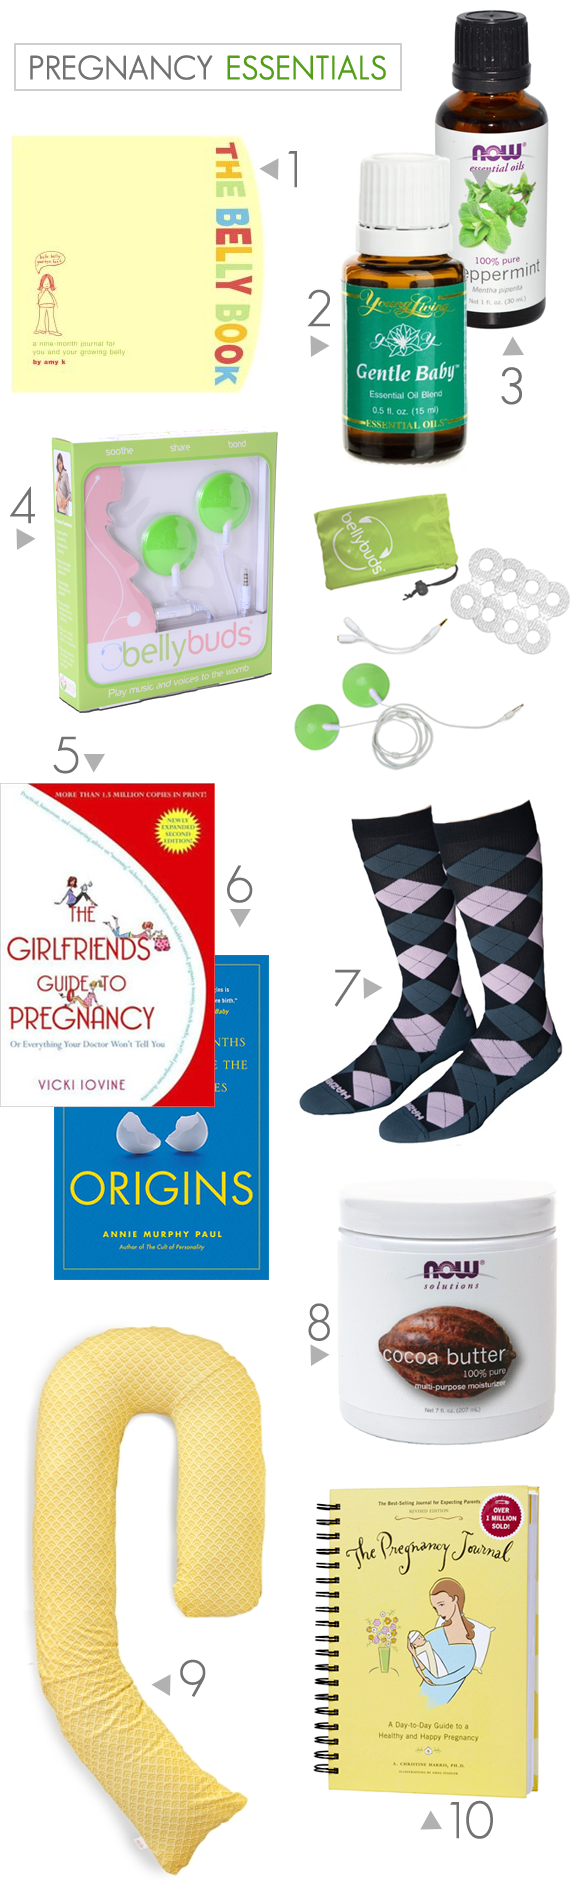 10 Pregnancy Essentials // Bubby and Bean